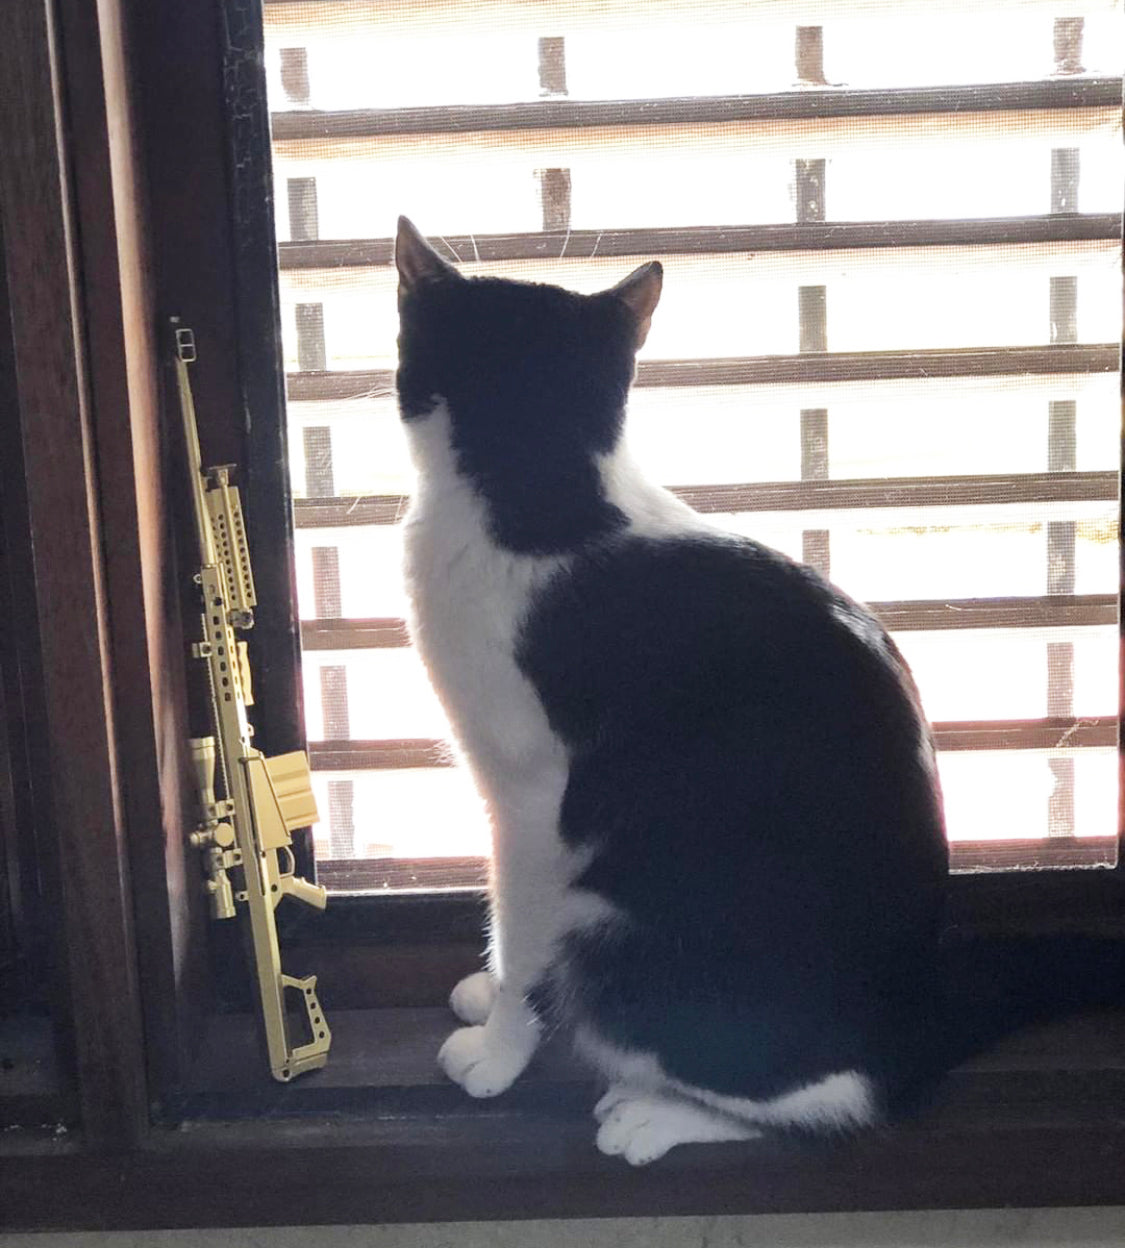 Cat looking out window with mini .50 cal by it